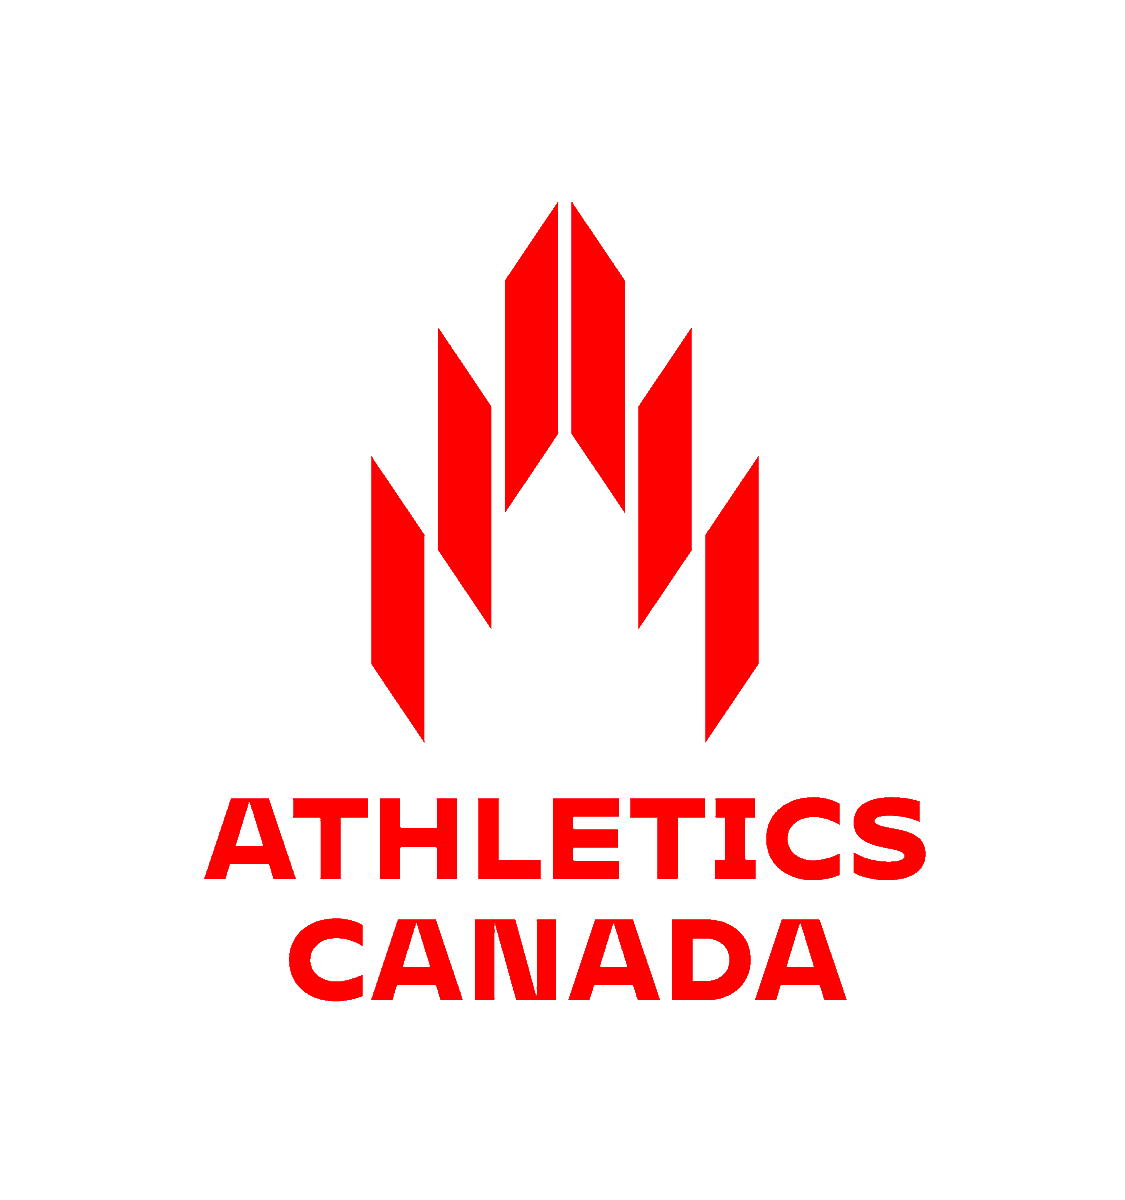 Athletics Canada chief executive Bedford retires after storm over sexually suggestive tweets